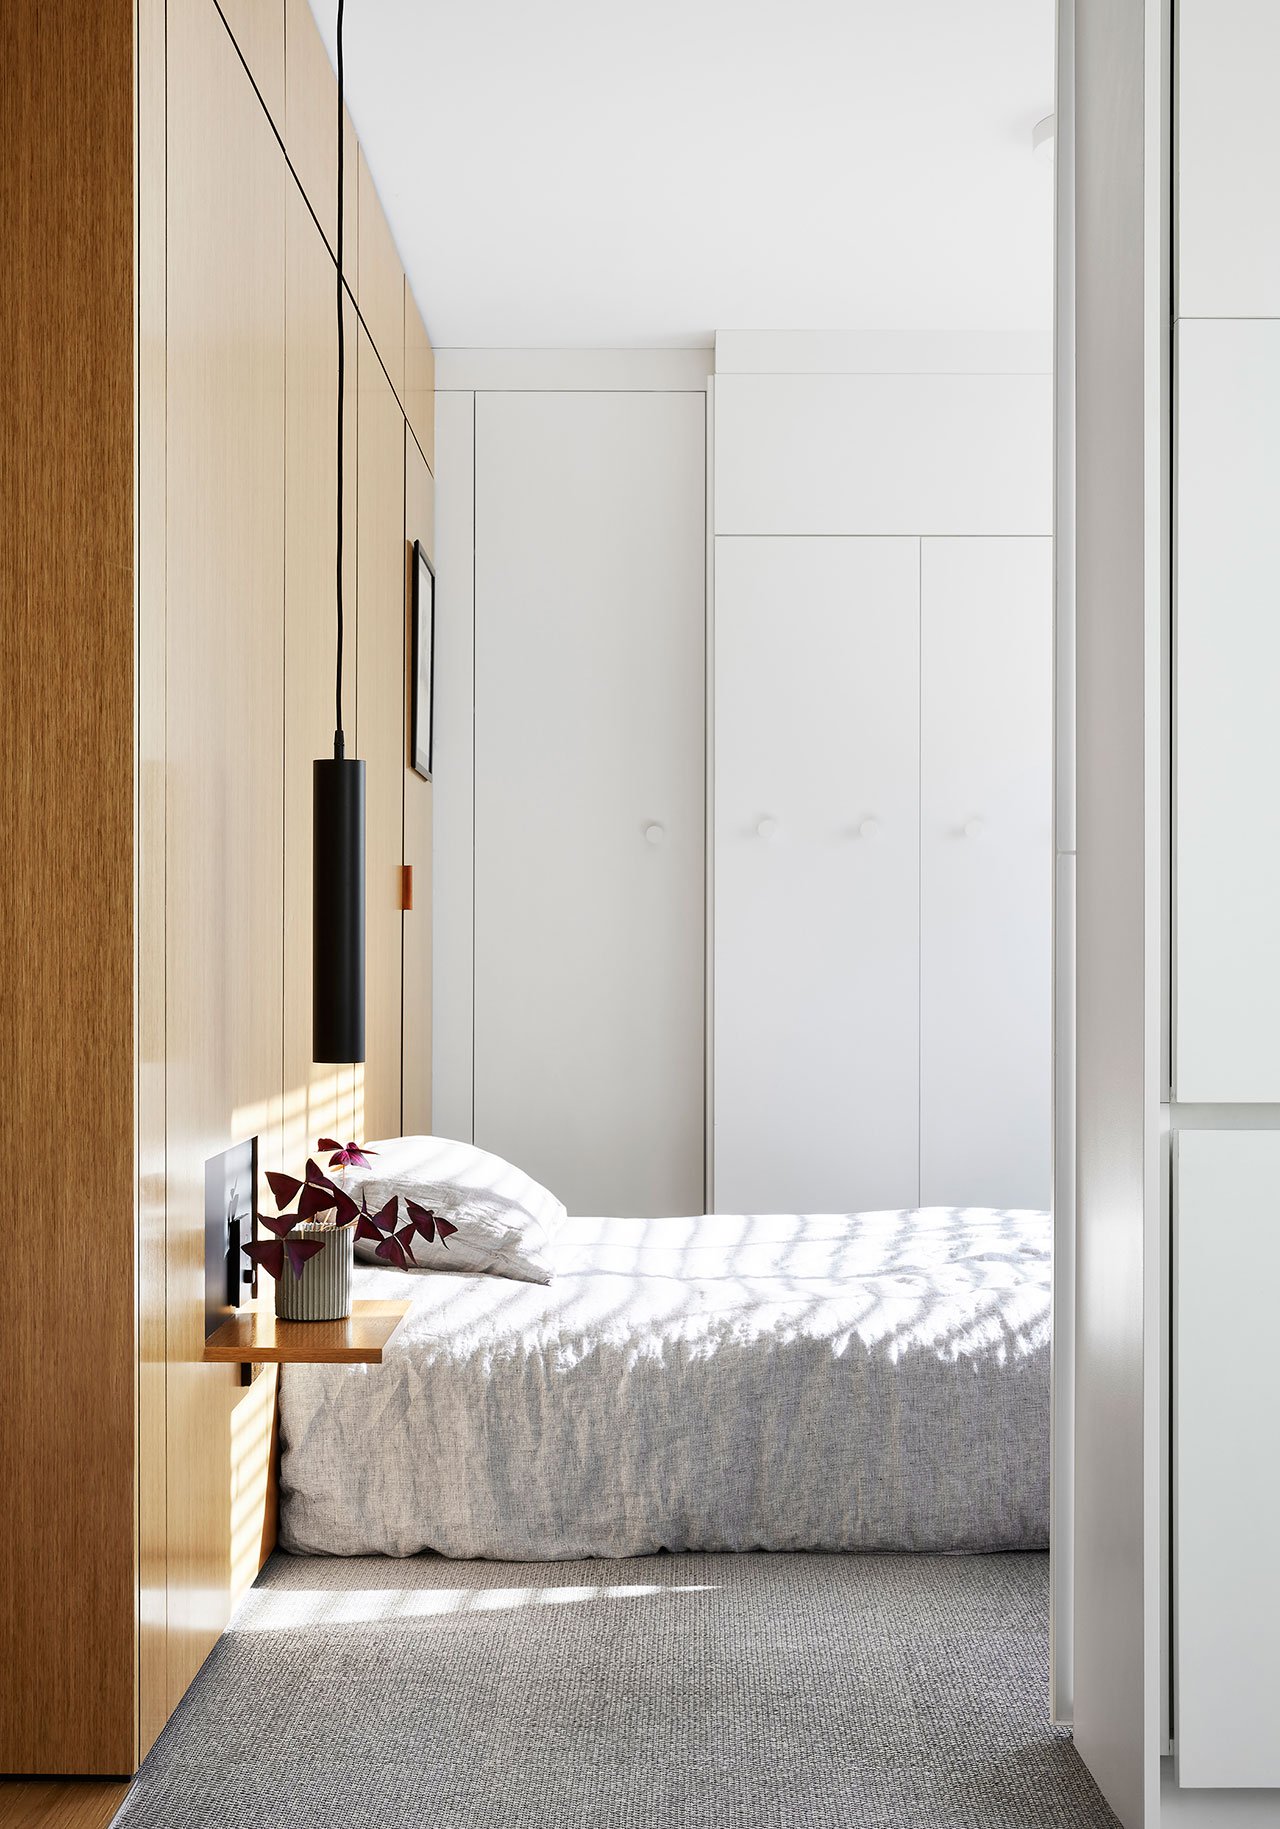 The bedroom is small and laconic, it features a woodne headboard that acts as storage, floating nightstandns and pendant lamps